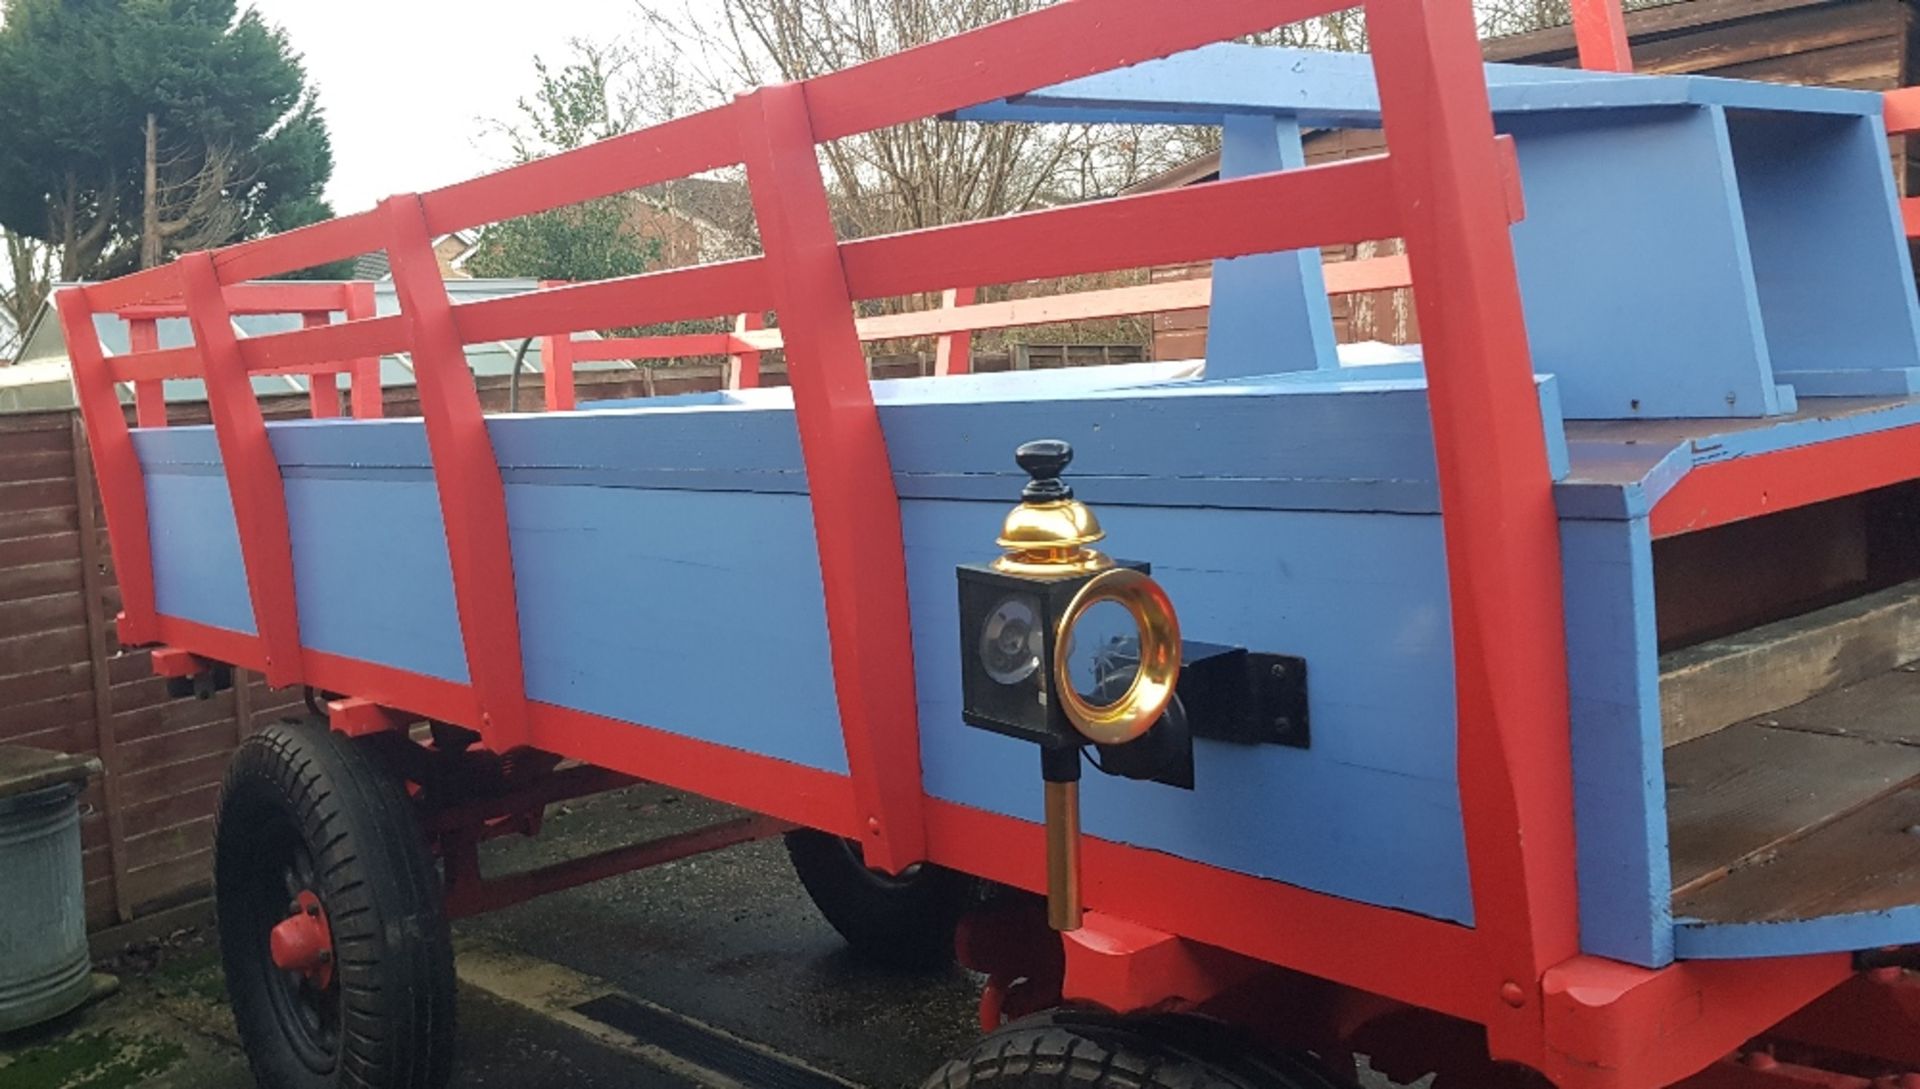 WAGONETTE to suit 17 to 19hh pair. Painted red and blue with red lining and undercarriage with - Image 5 of 8